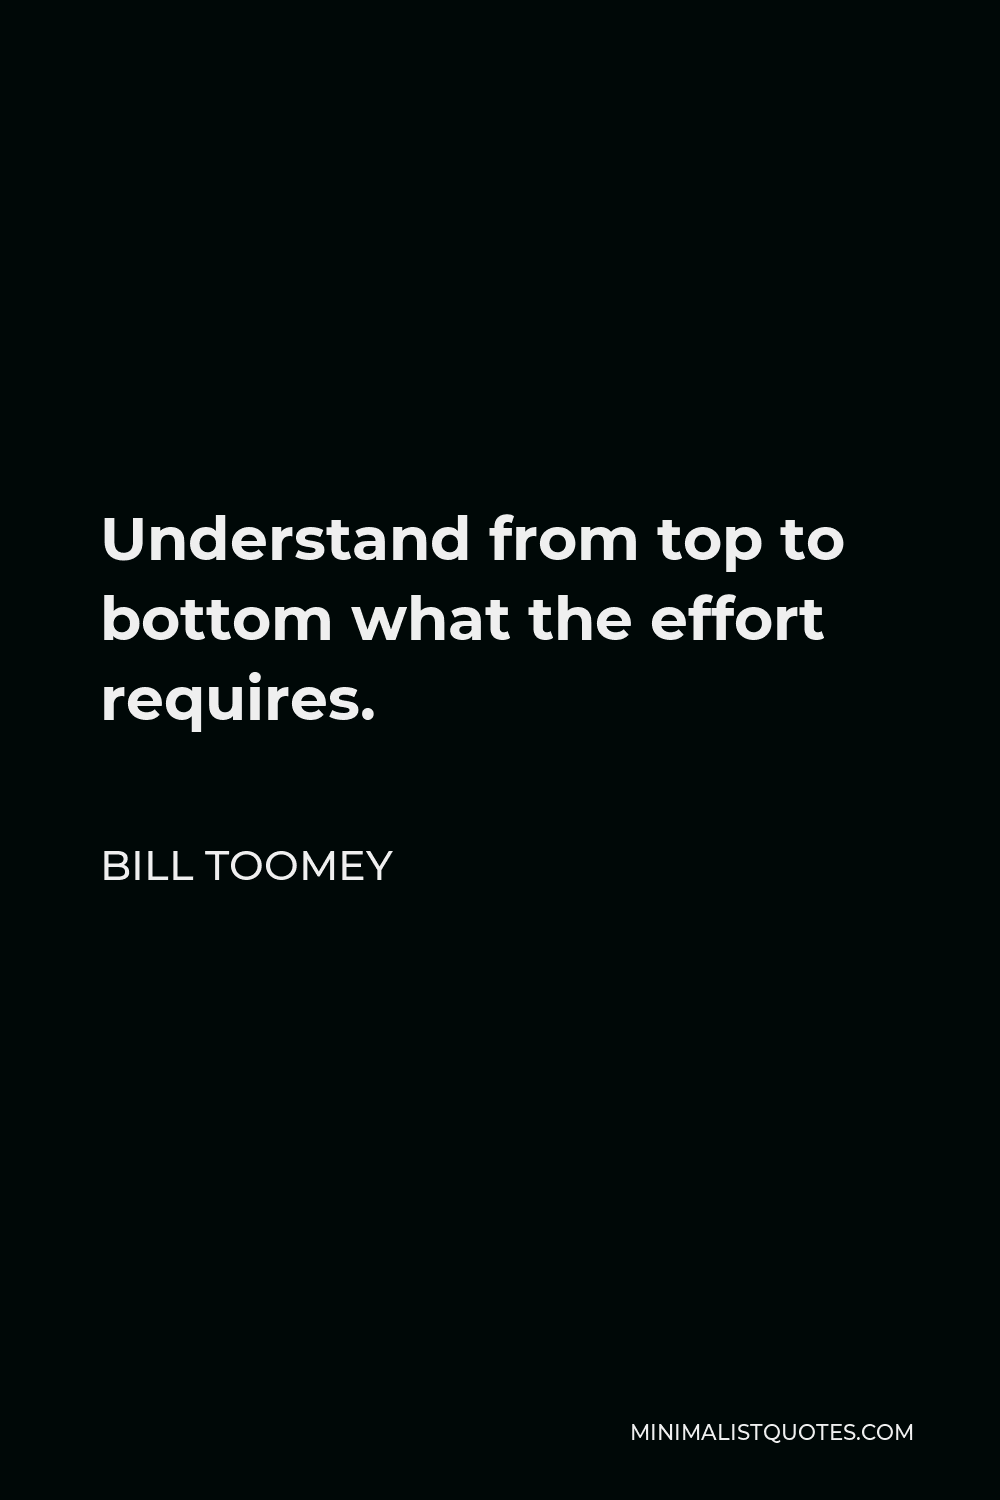 Bill Toomey Quote - Understand from top to bottom what the effort requires.